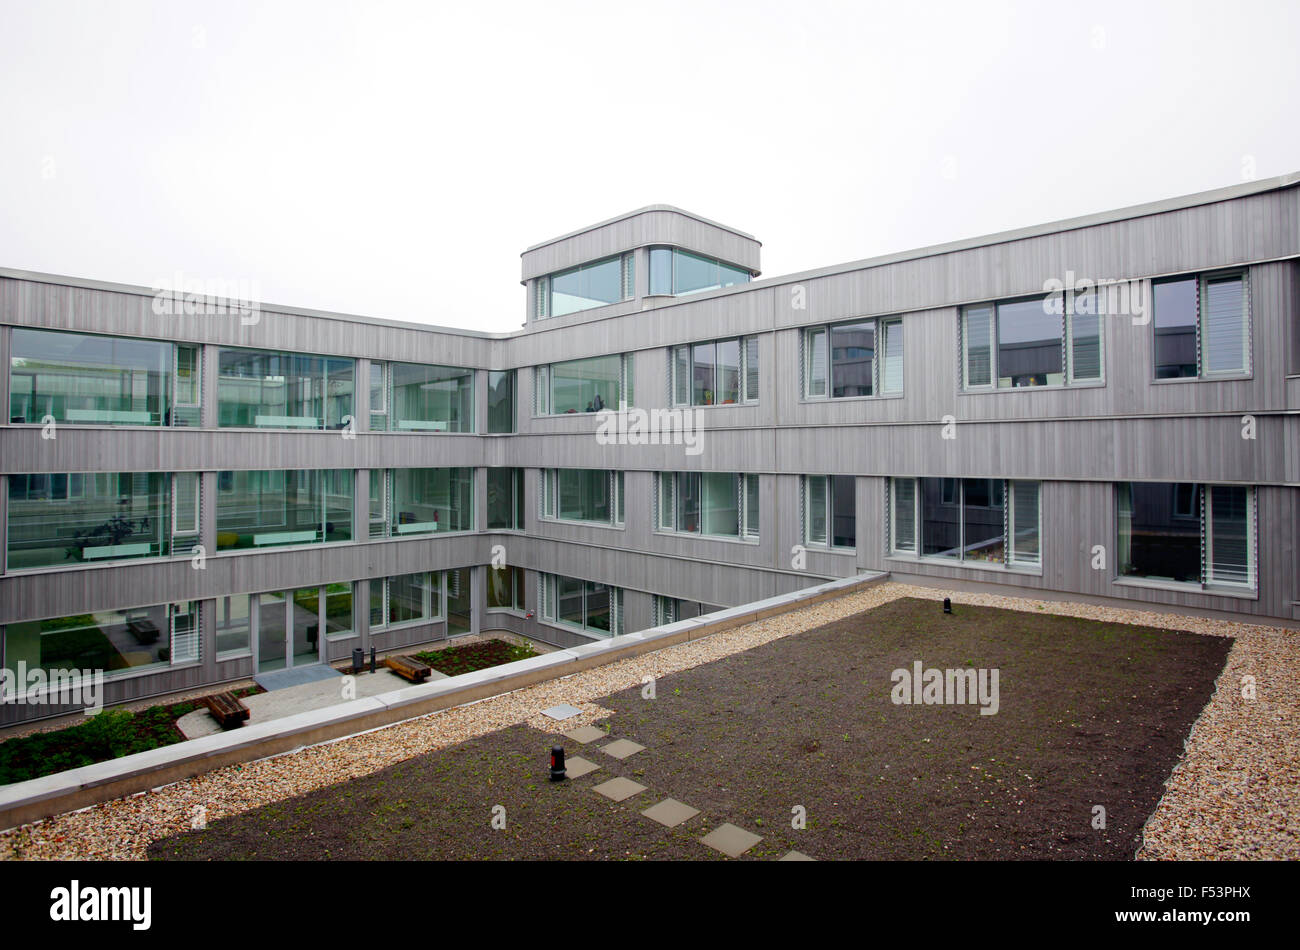 27.04.2015, Berlin, Berlin, Germany - Freie UniversitŠt (FU) Berlin presents the new building for small pockets and the campus library. 0PA150427D627CAROEX.JPG - NOT for SALE in G E R M A N Y, A U S T R I A, S W I T Z E R L A N D [MODEL RELEASE: NOT APPLICABLE, PROPERTY RELEASE: NO (c) caro photo agency / Ponizak, http://www.caro-images.pl, info@carofoto.pl - In case of using the picture for non-journalistic purposes, please contact the agency - the picture is subject to royalty!] Stock Photo